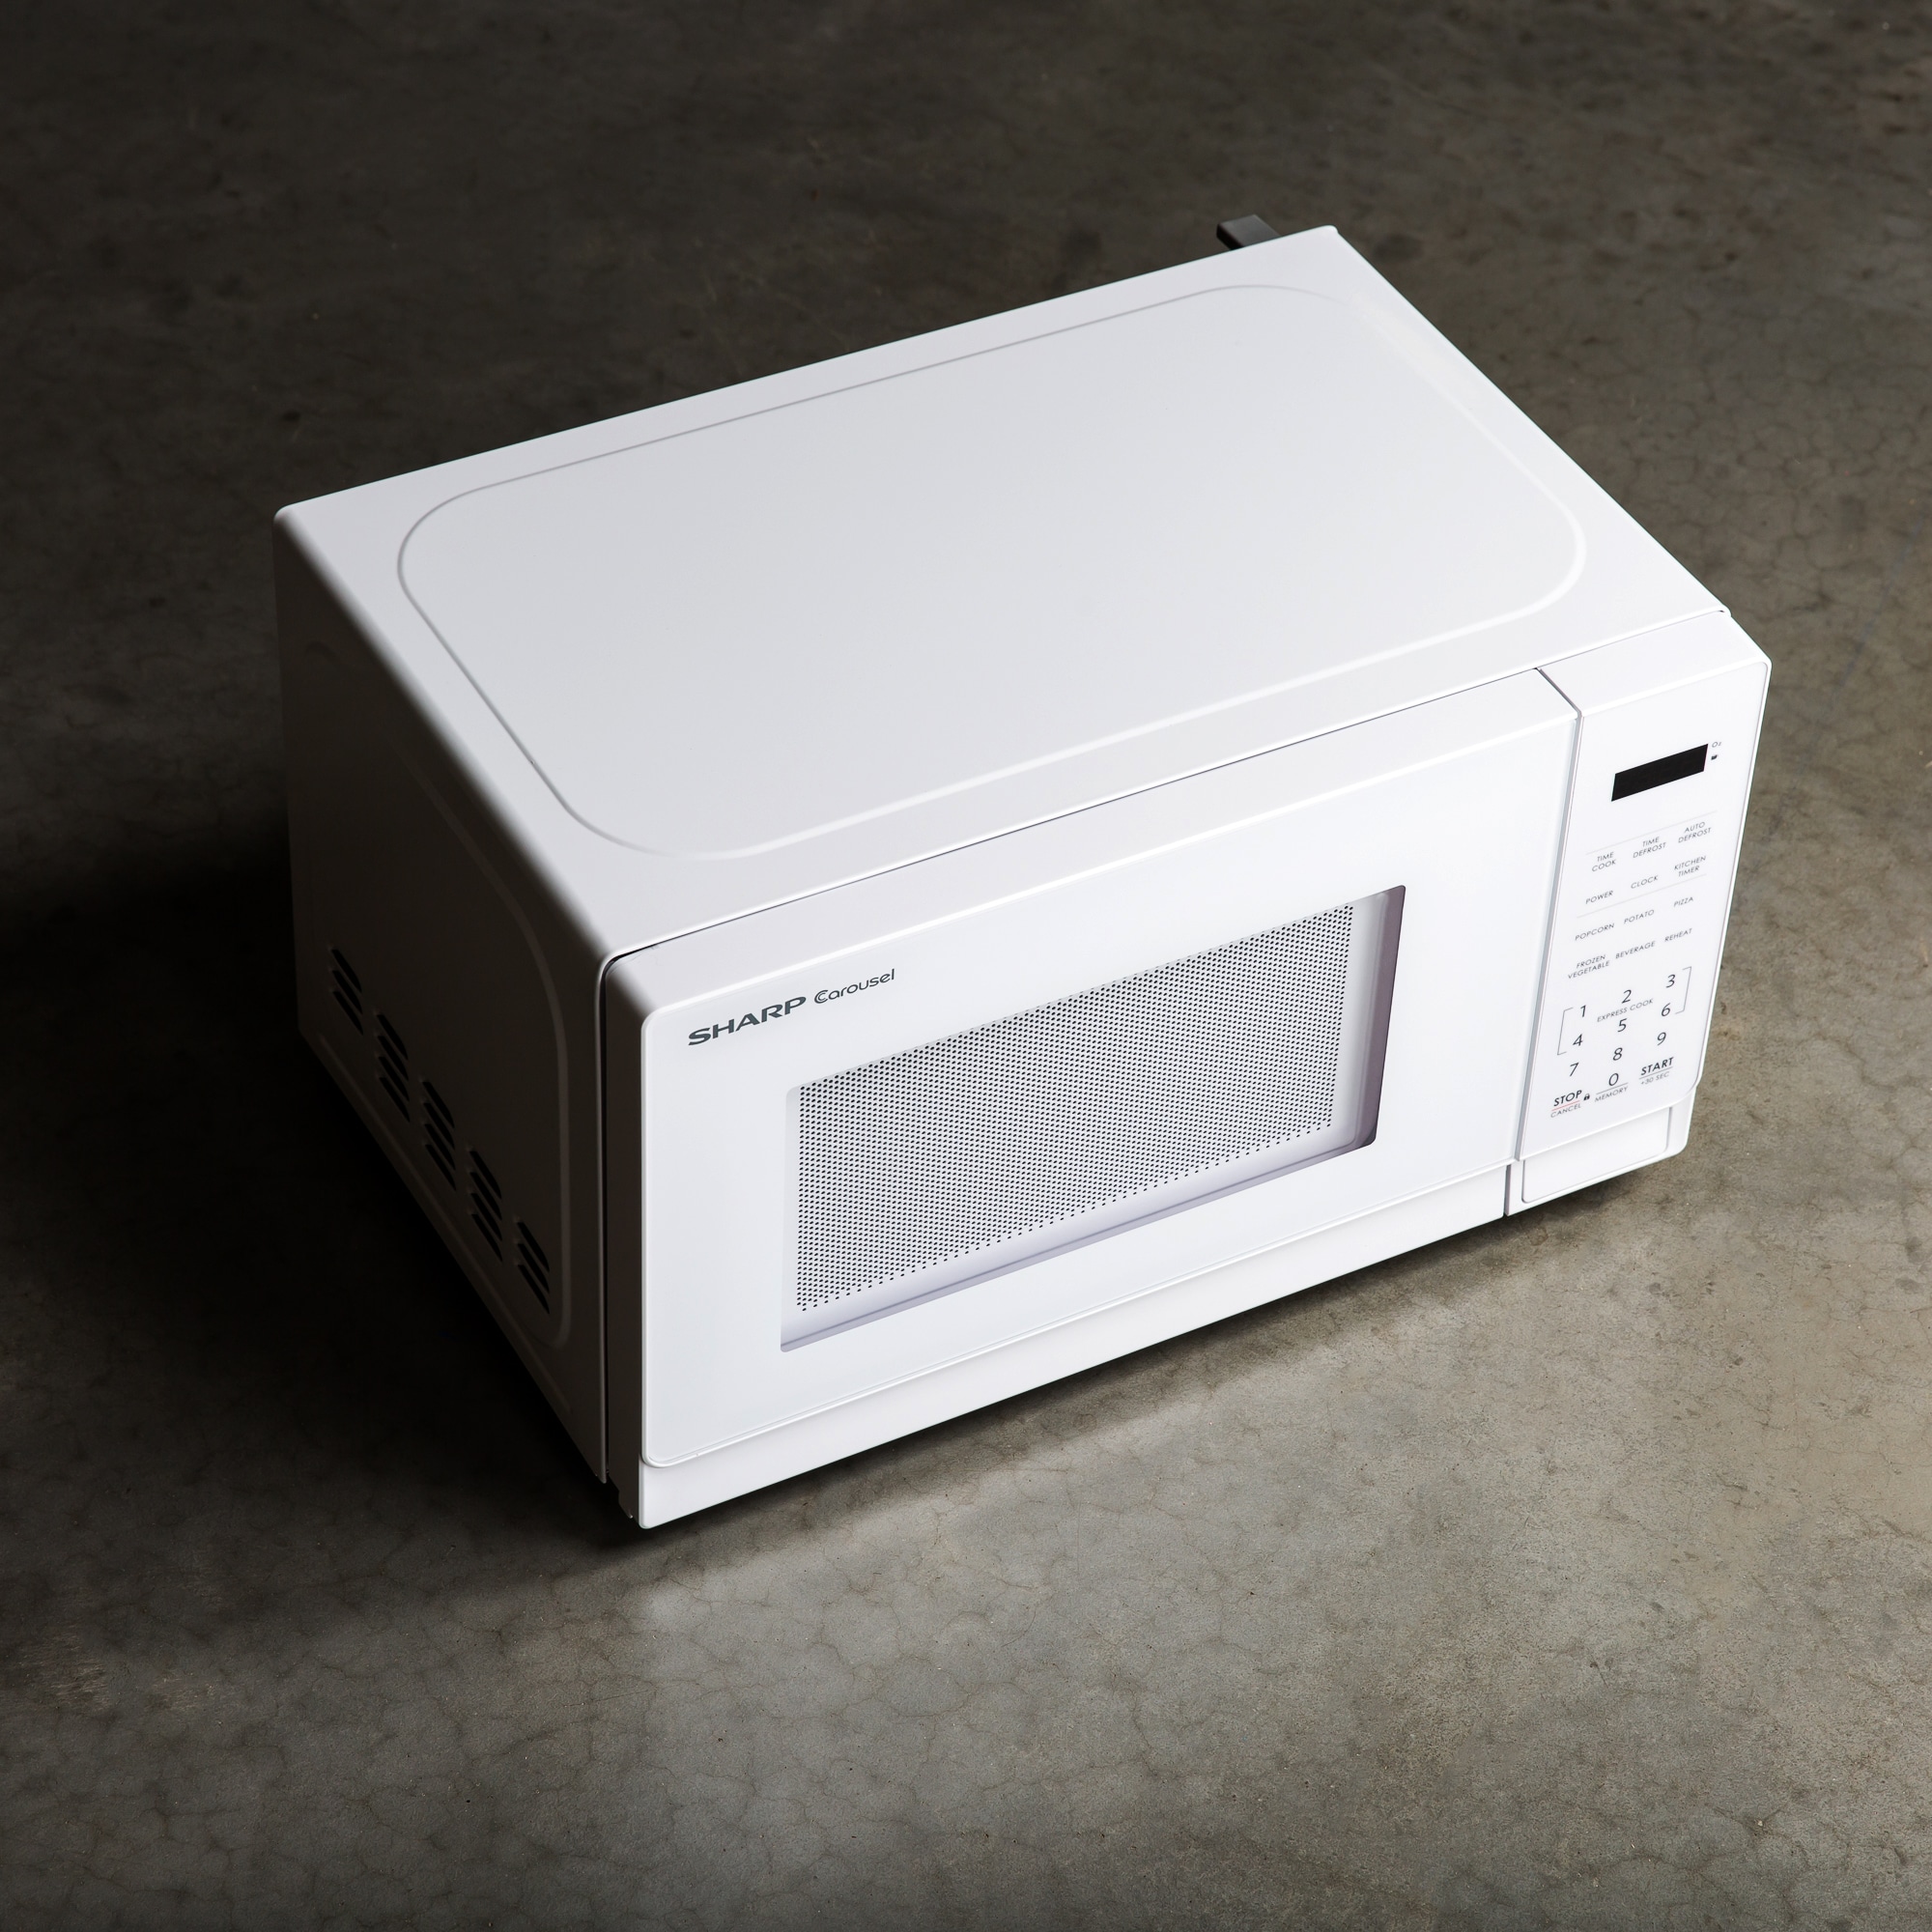 0.7 Cubic Foot Compact Microwave (White)-55965